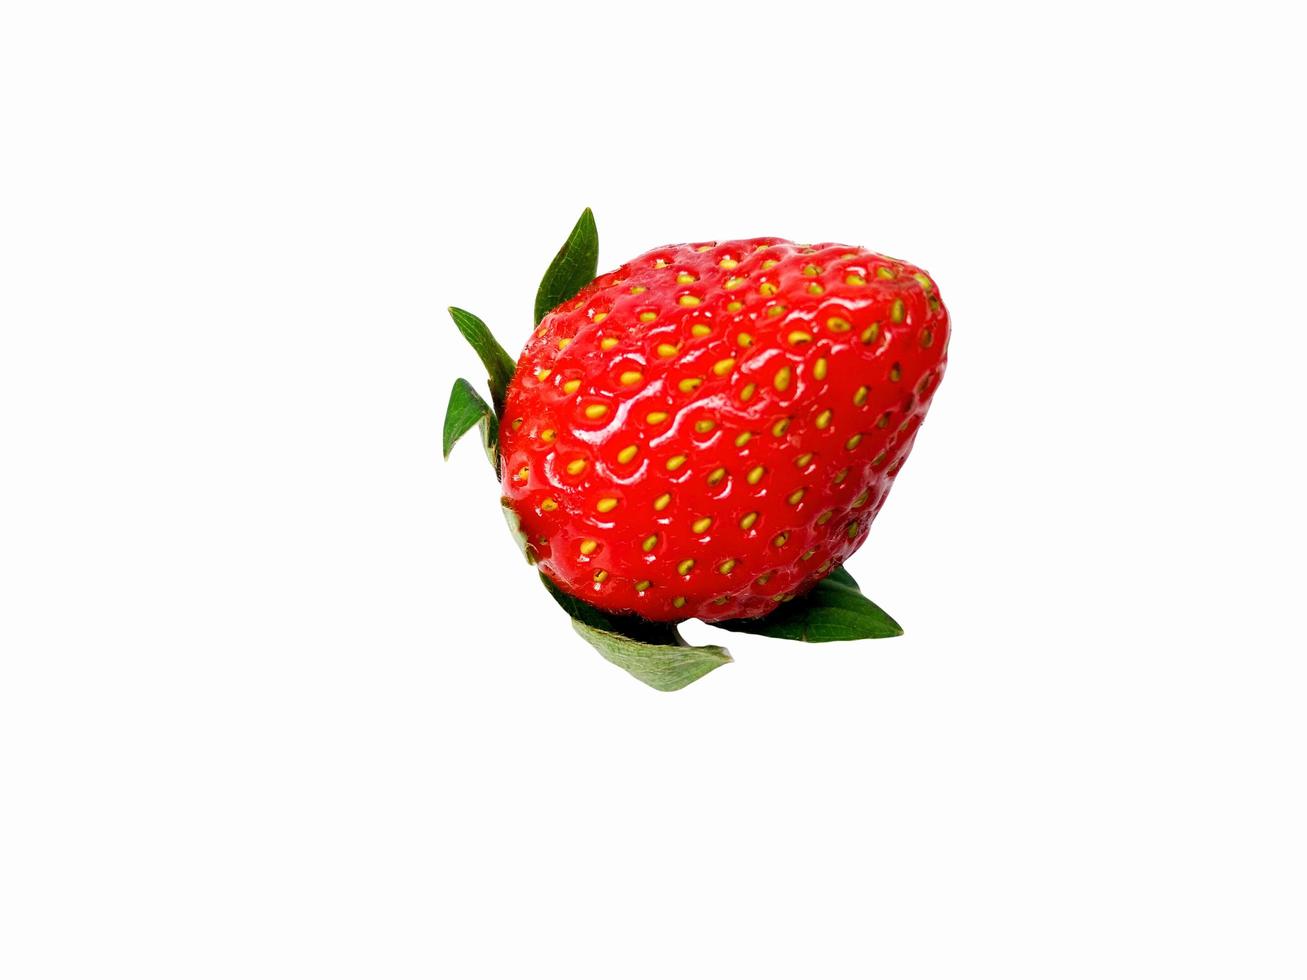 background from freshly harvested strawberries, directly above good for healthy photo